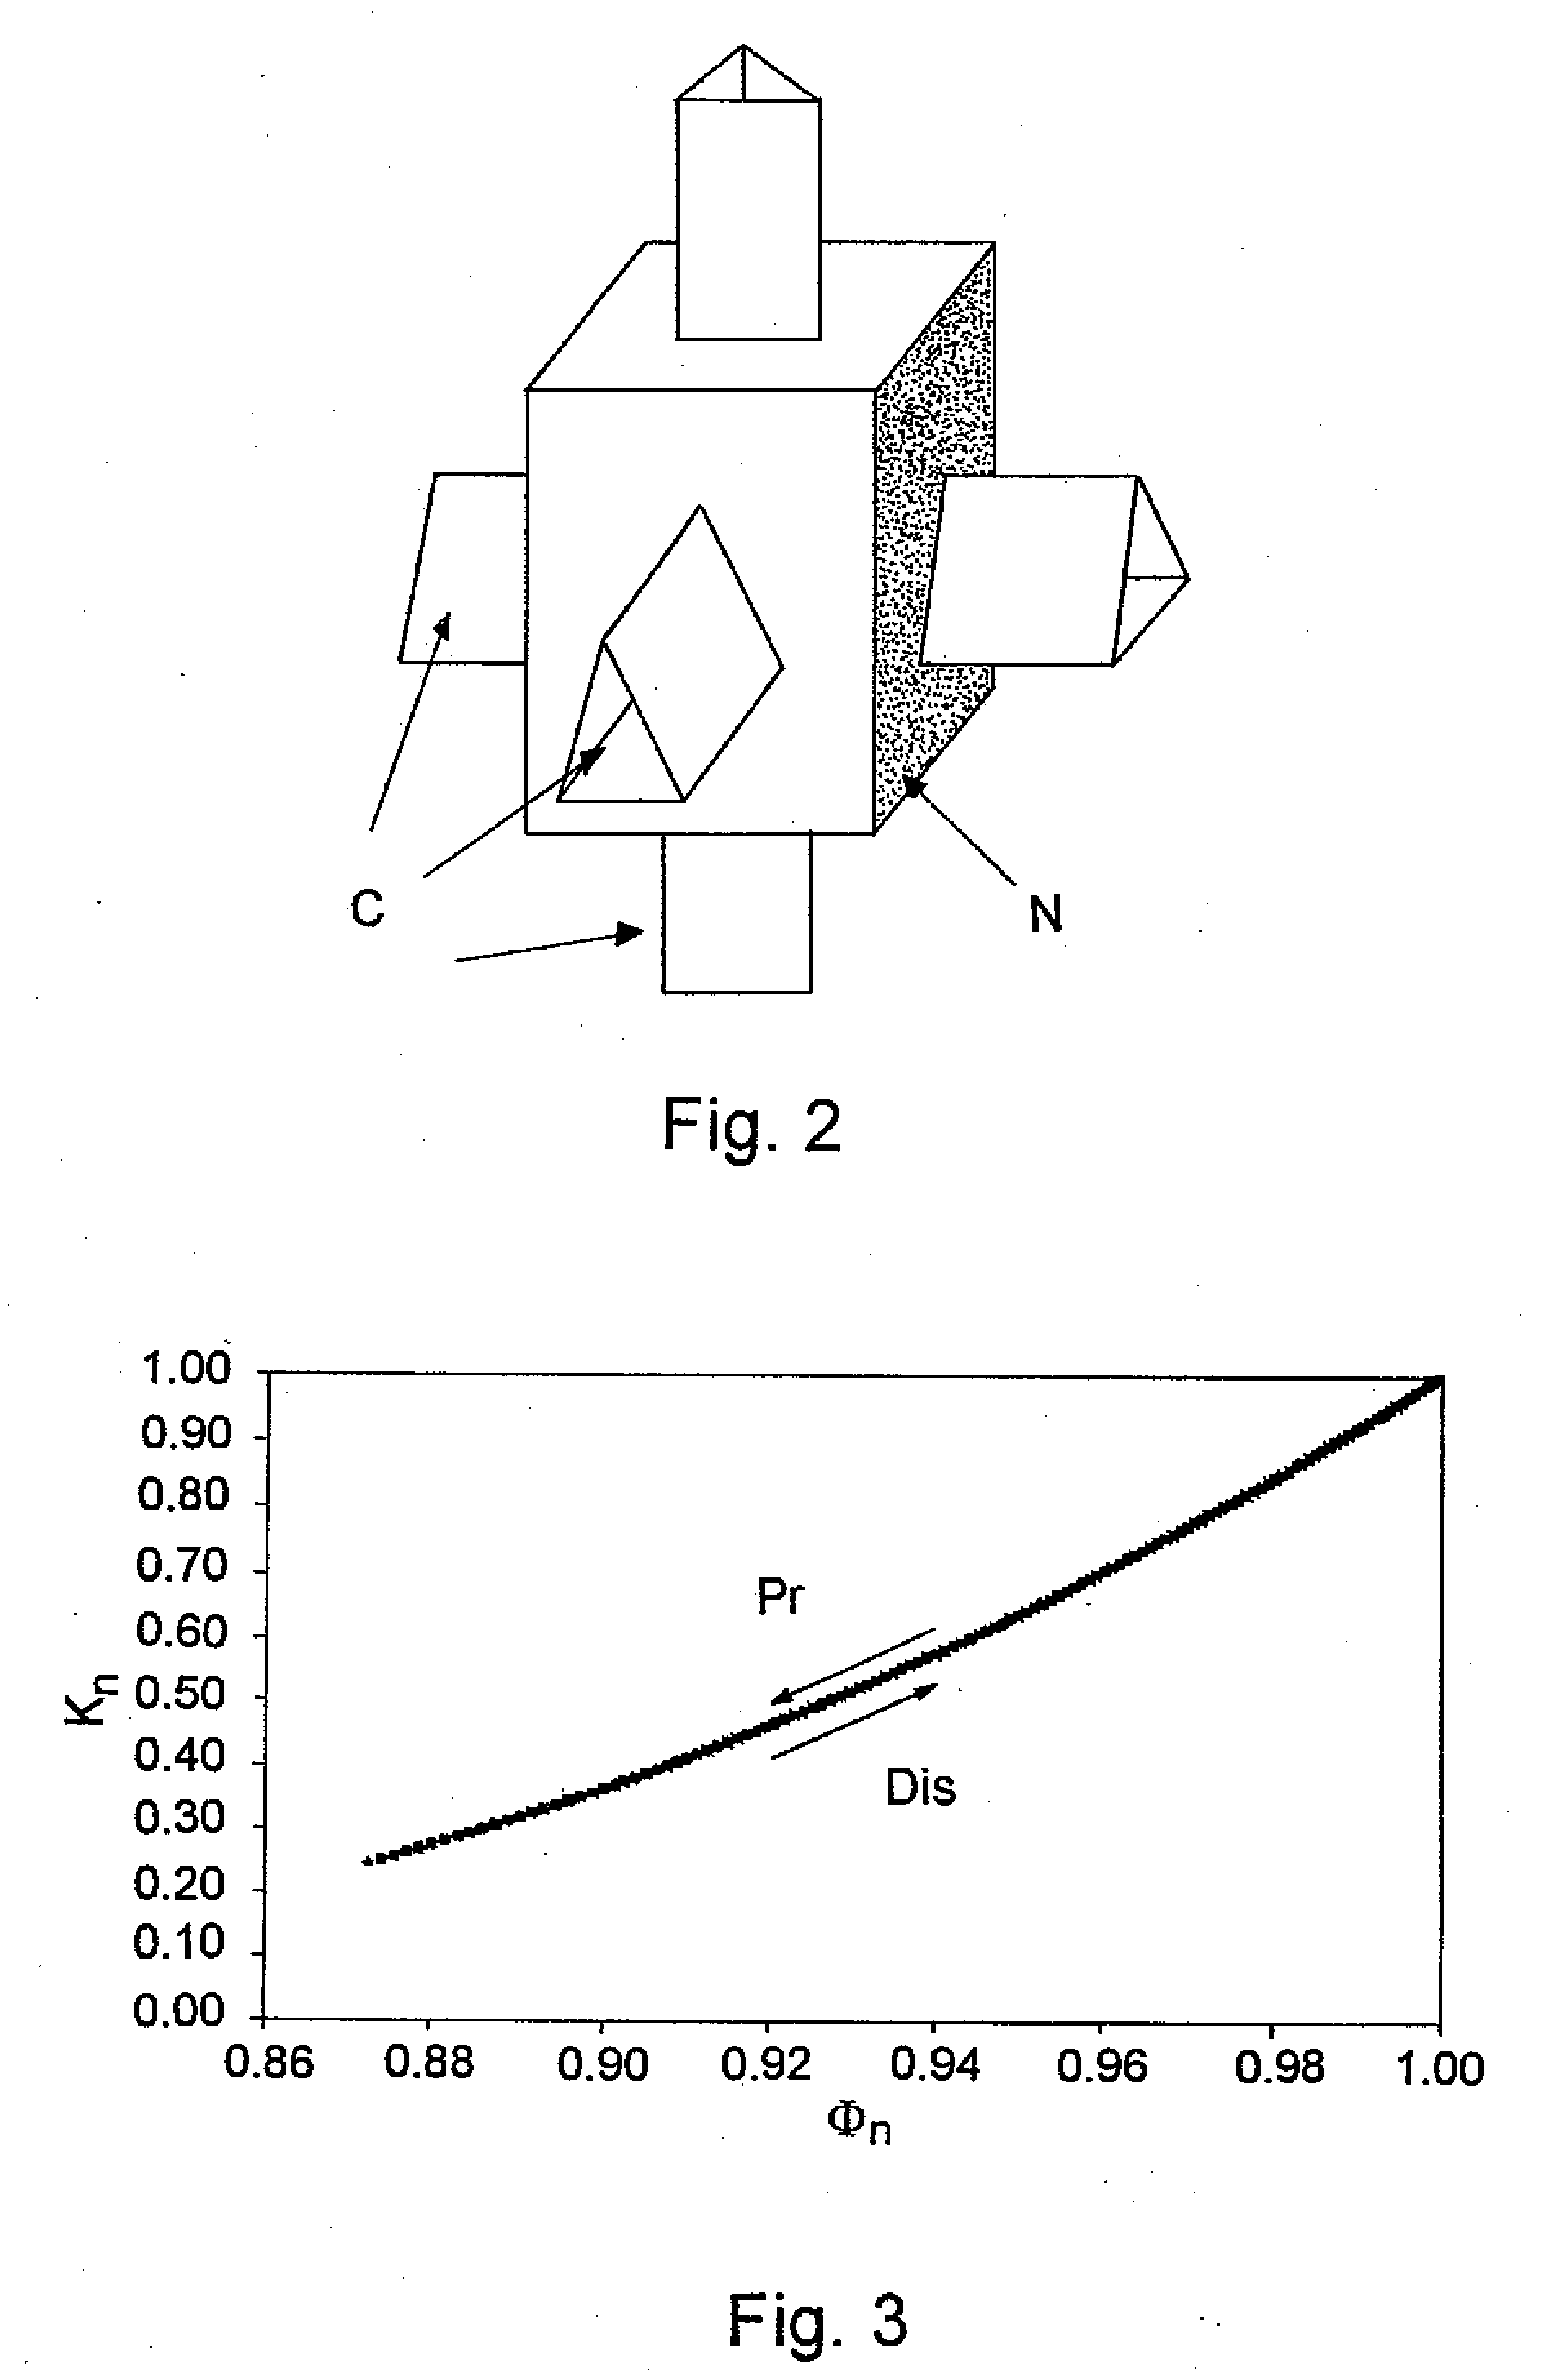 Method of determining the evolution of petrophysical properties of a rock during diagenesis